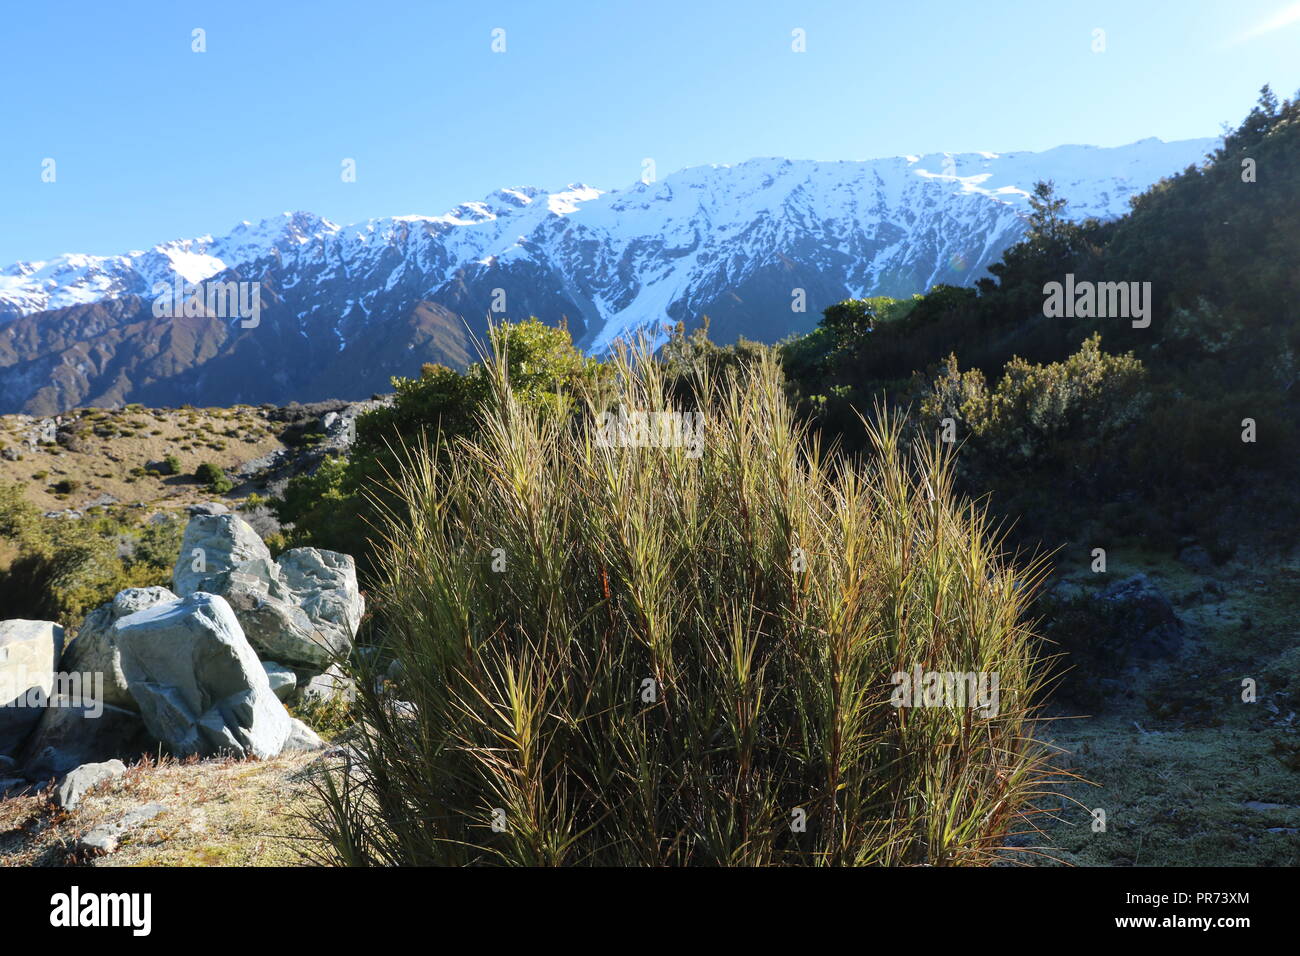 Mount Cook National Park and Hiking the Hooker Valley track, Stock Photo